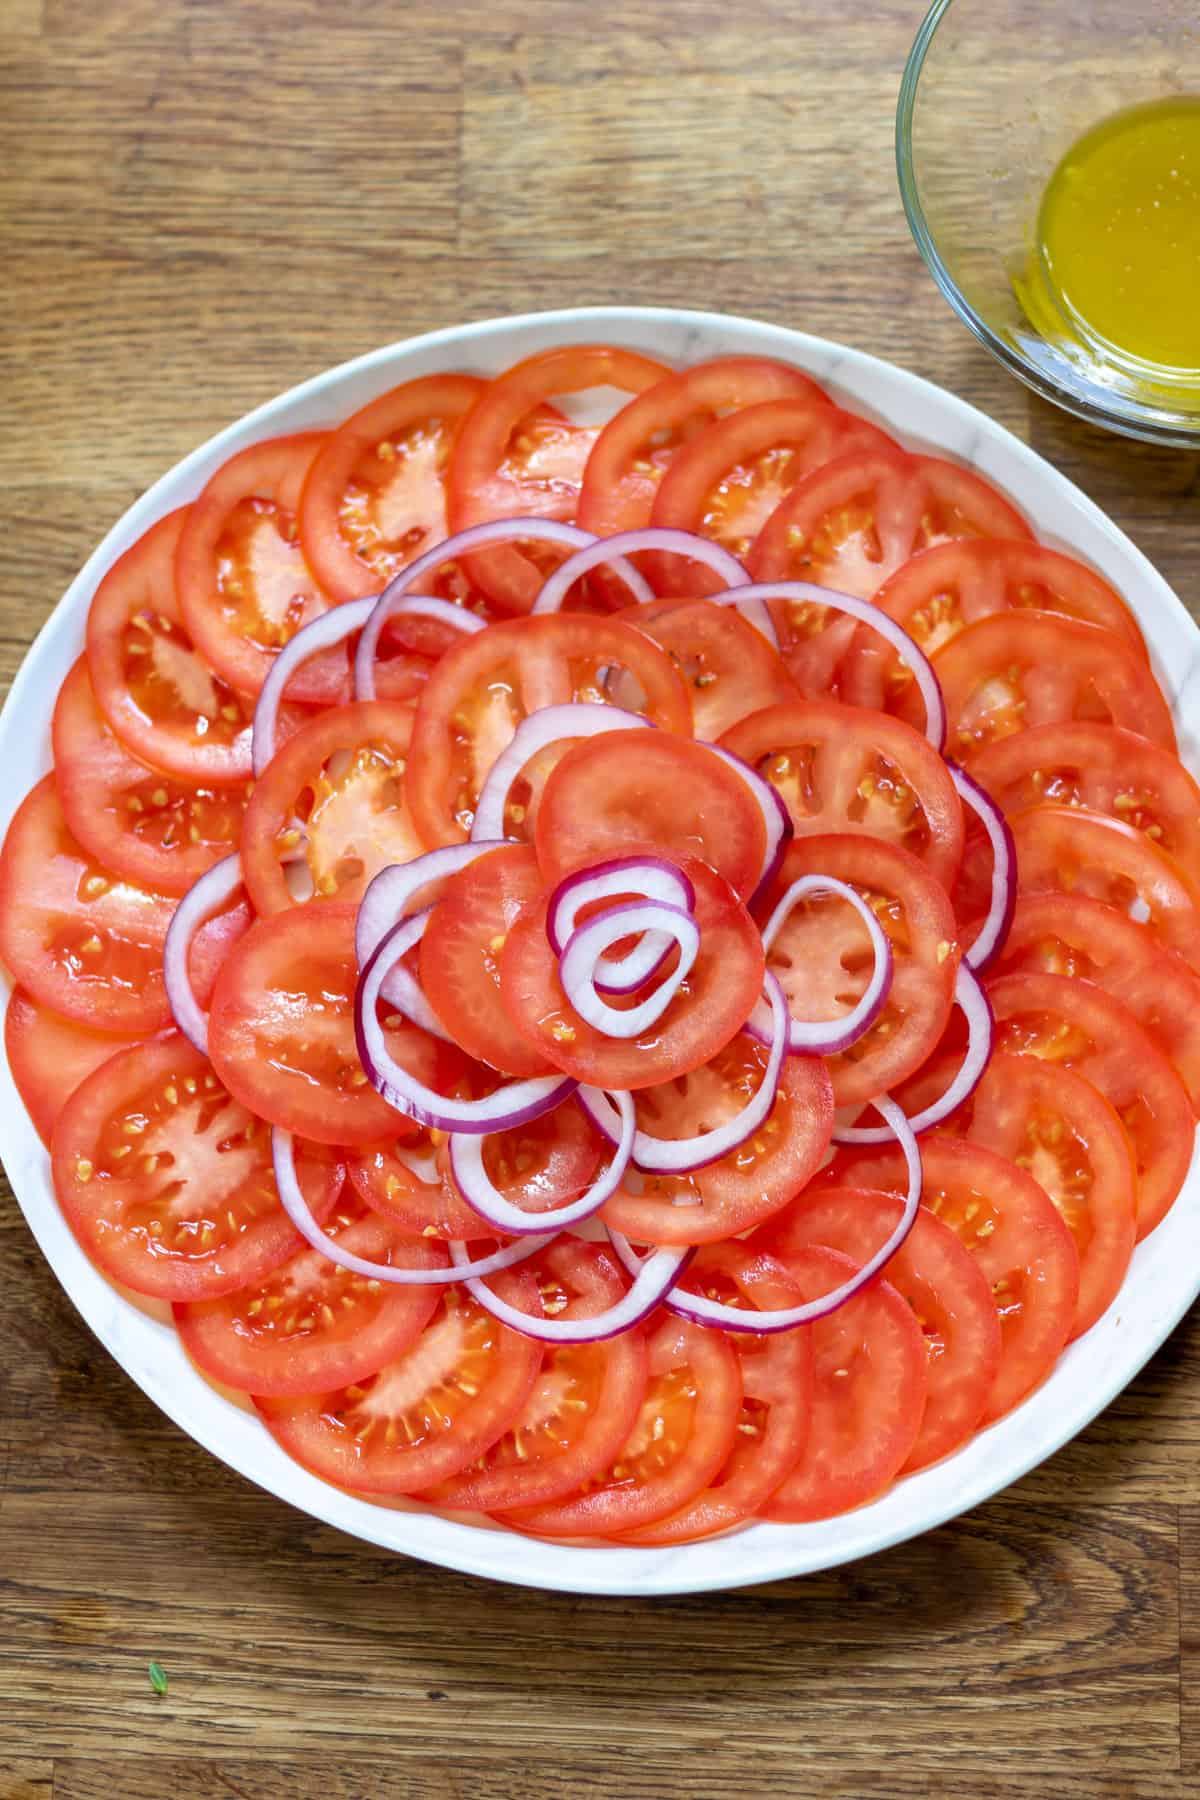 Layering the sliced onion and tomatoes.